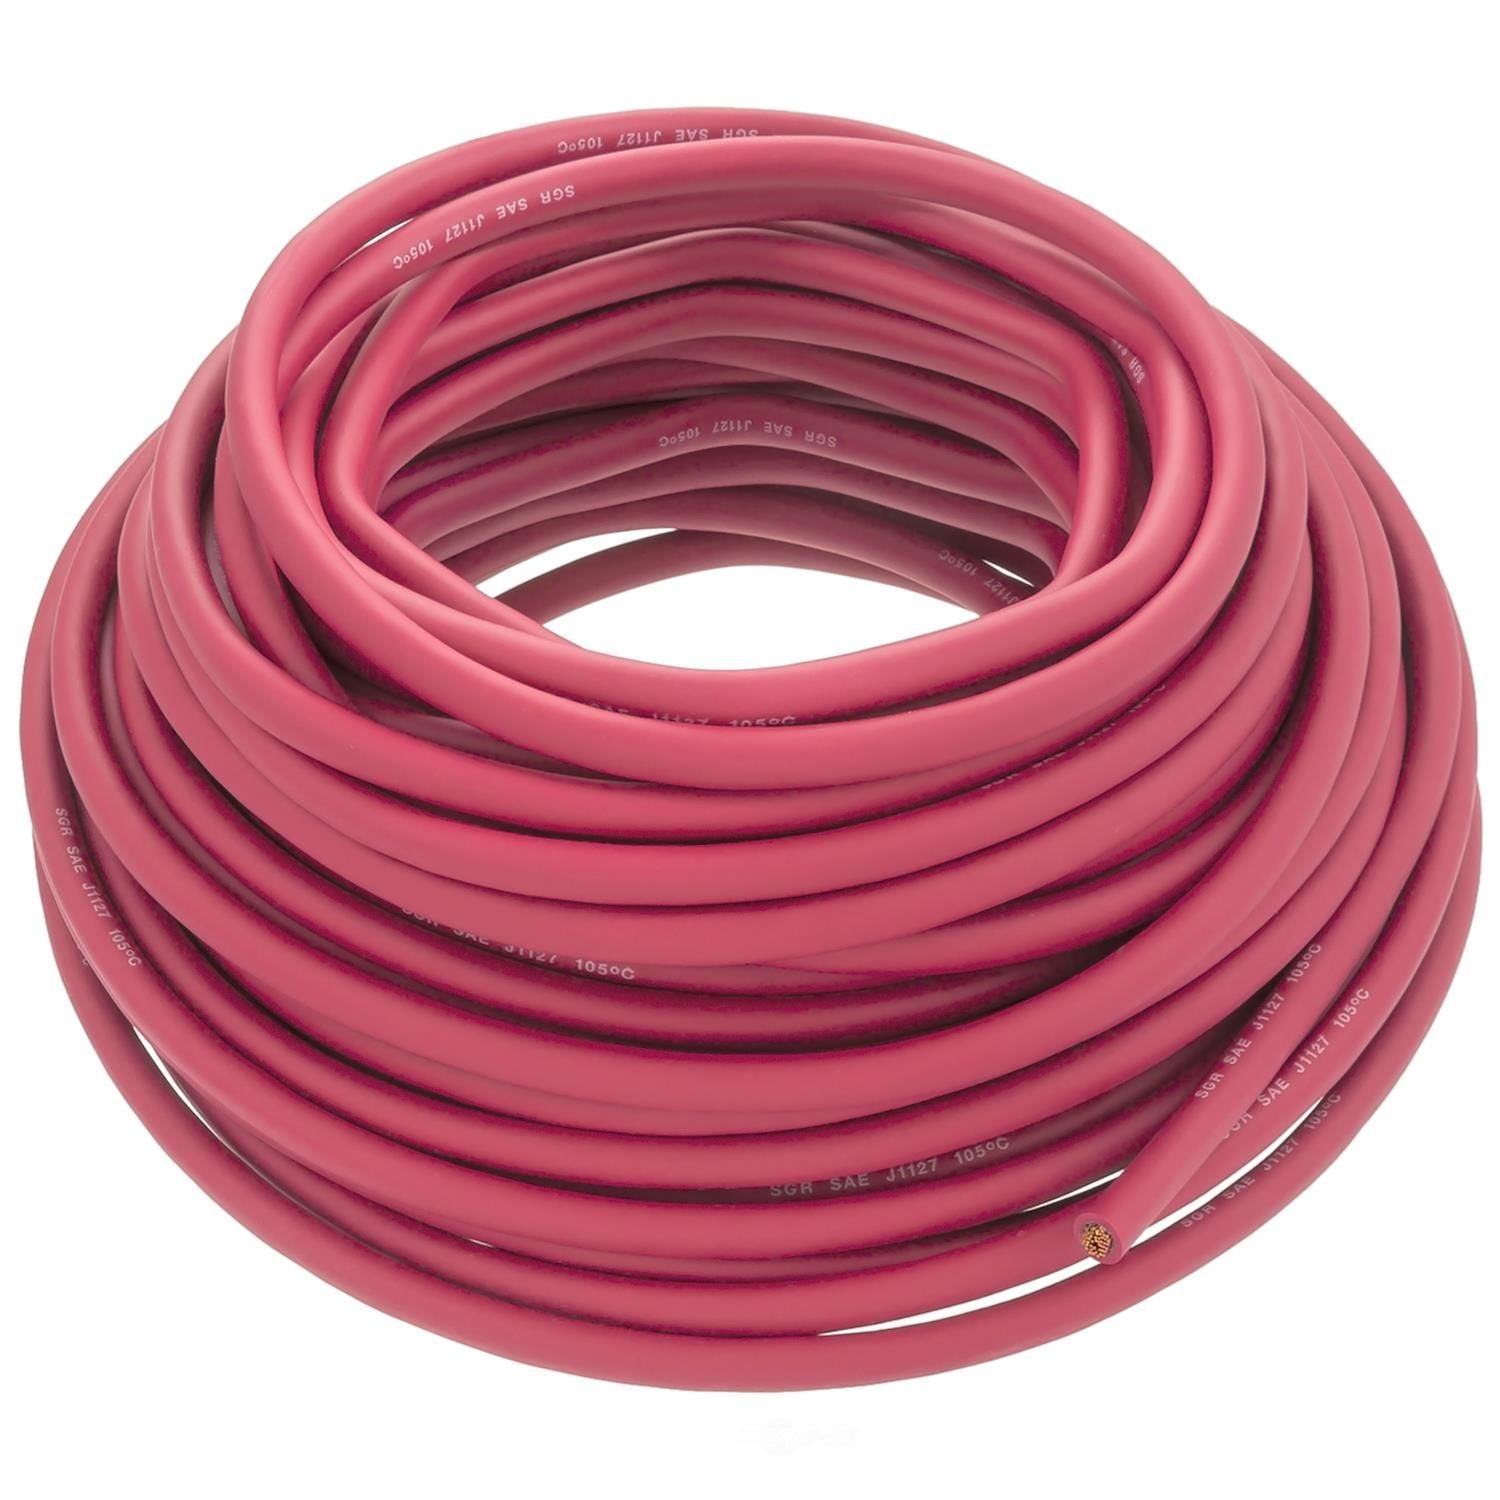 YSP CB13RD-100 Wells Bulk Cable (Red, 100', 4G)